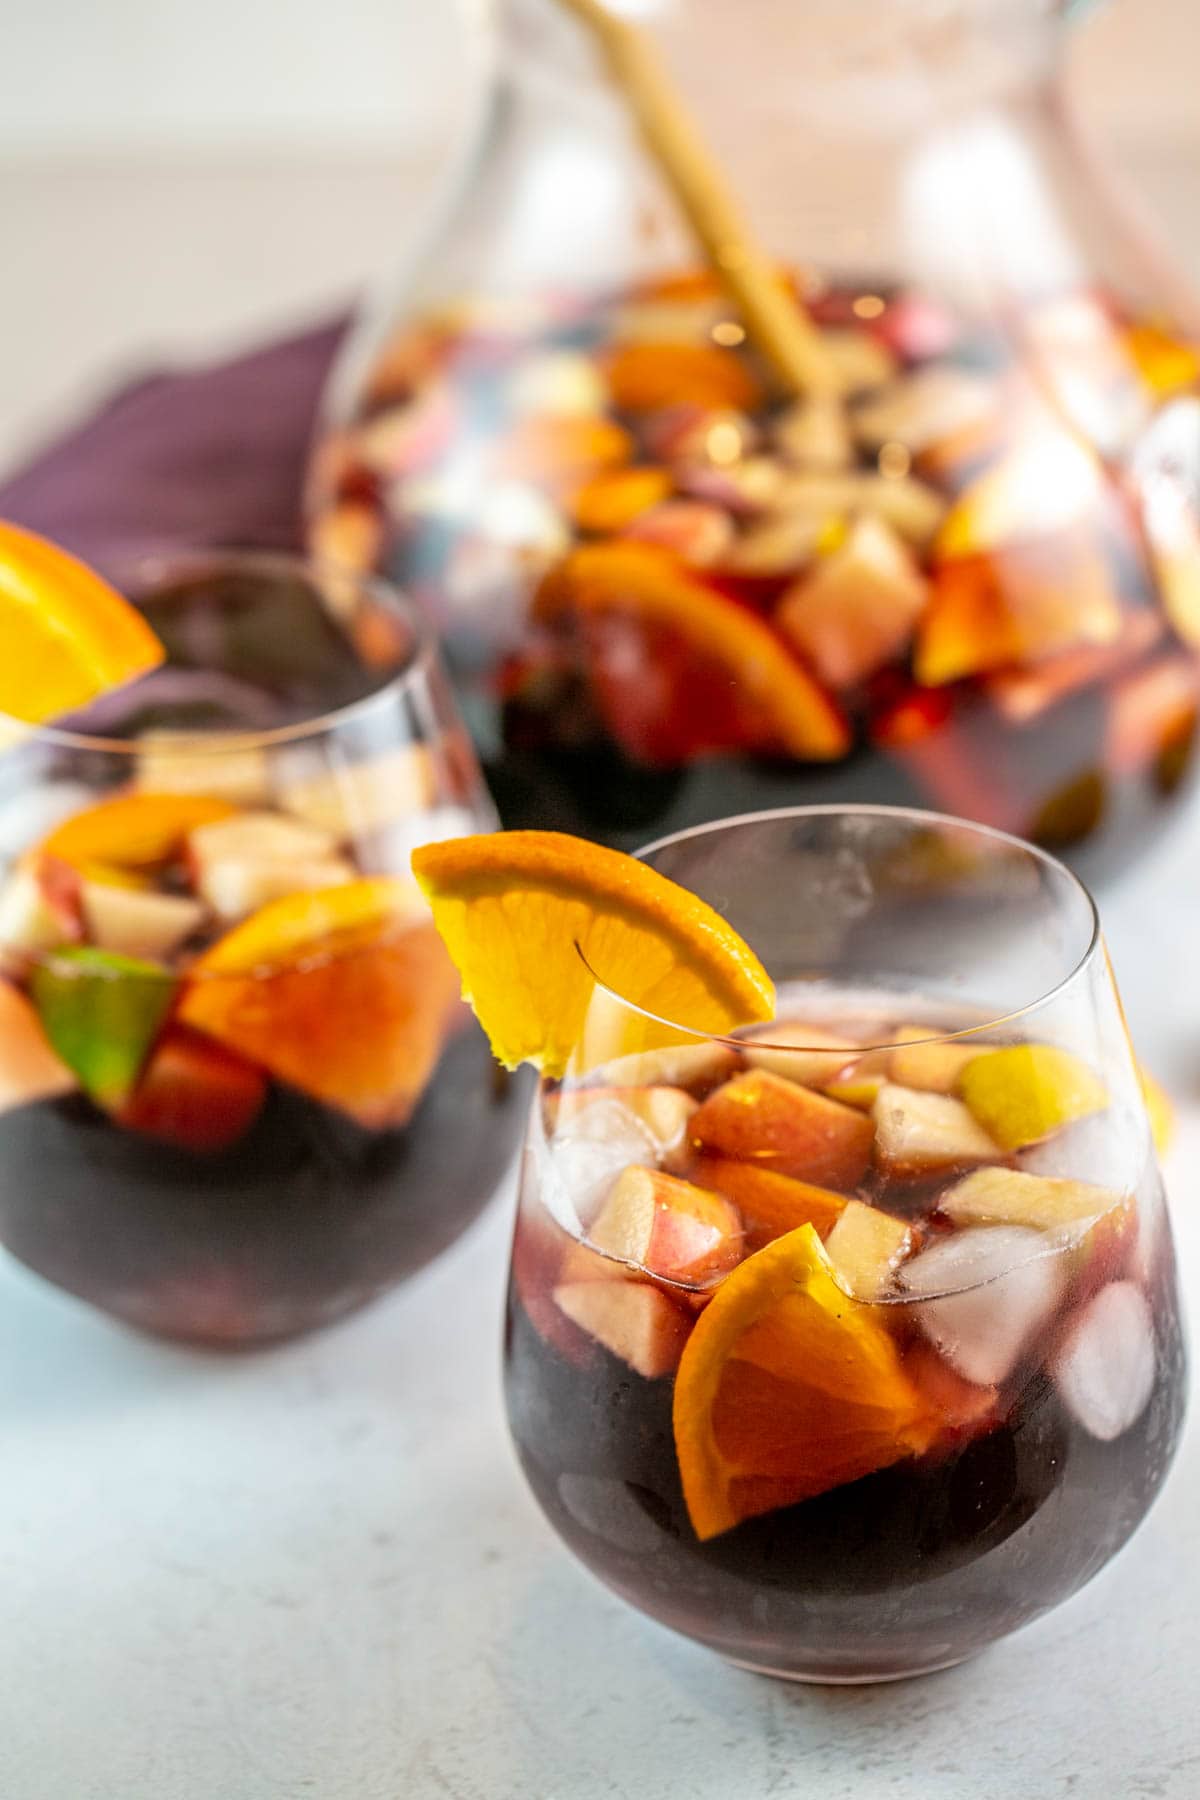 two glasses of sangria full of chopped fruit with the pitcher visible in the background